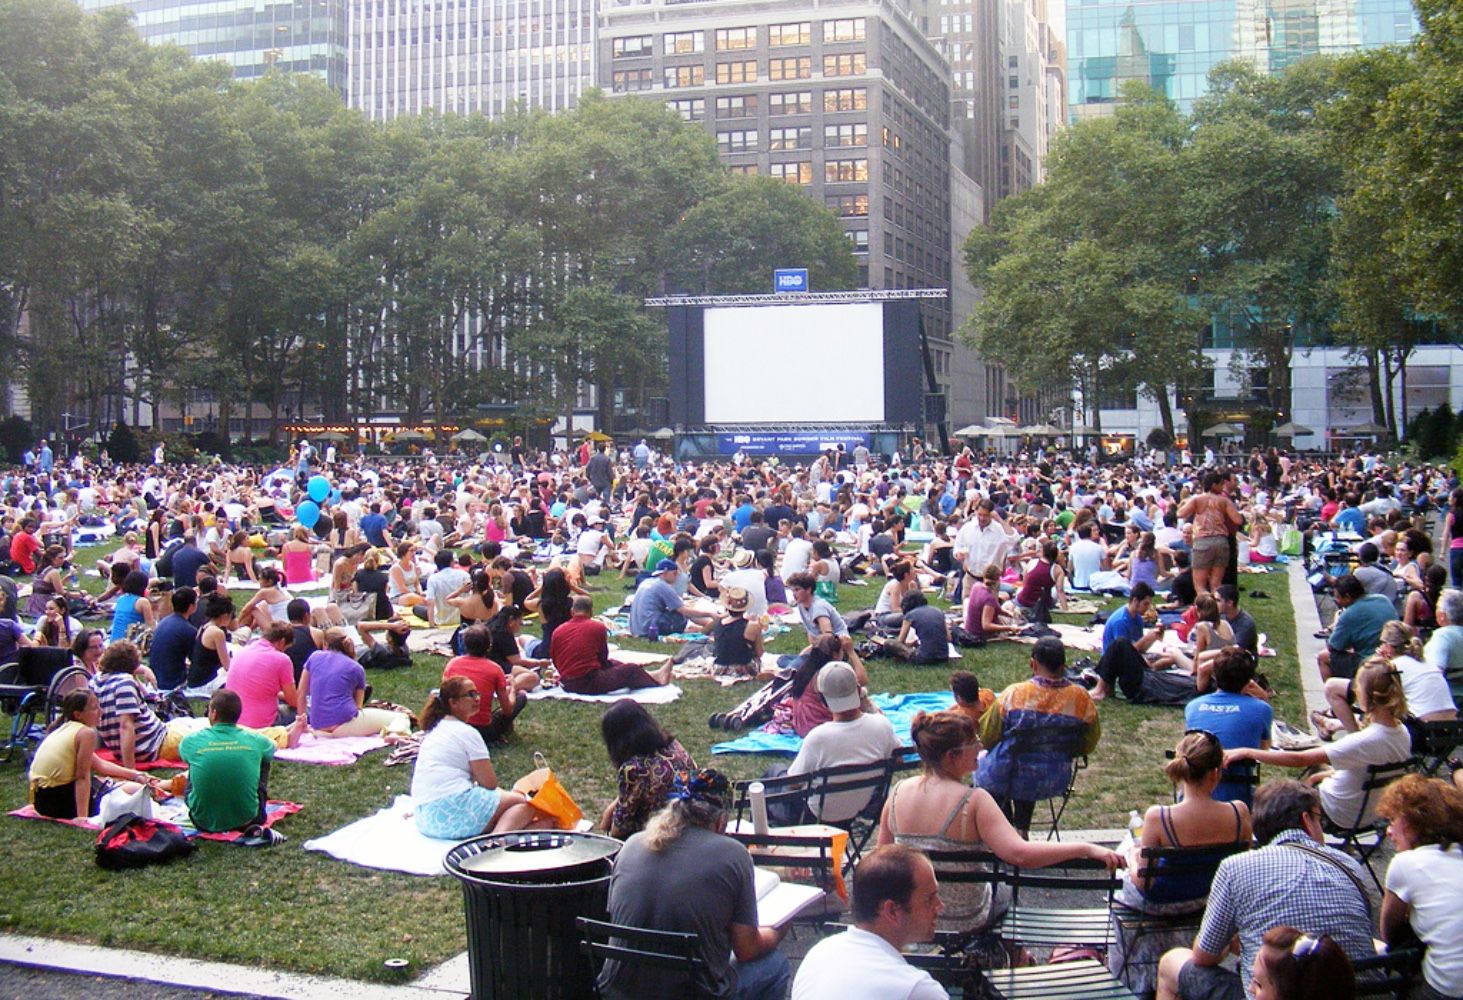 group of people sitting on lawn watching movie bryant park